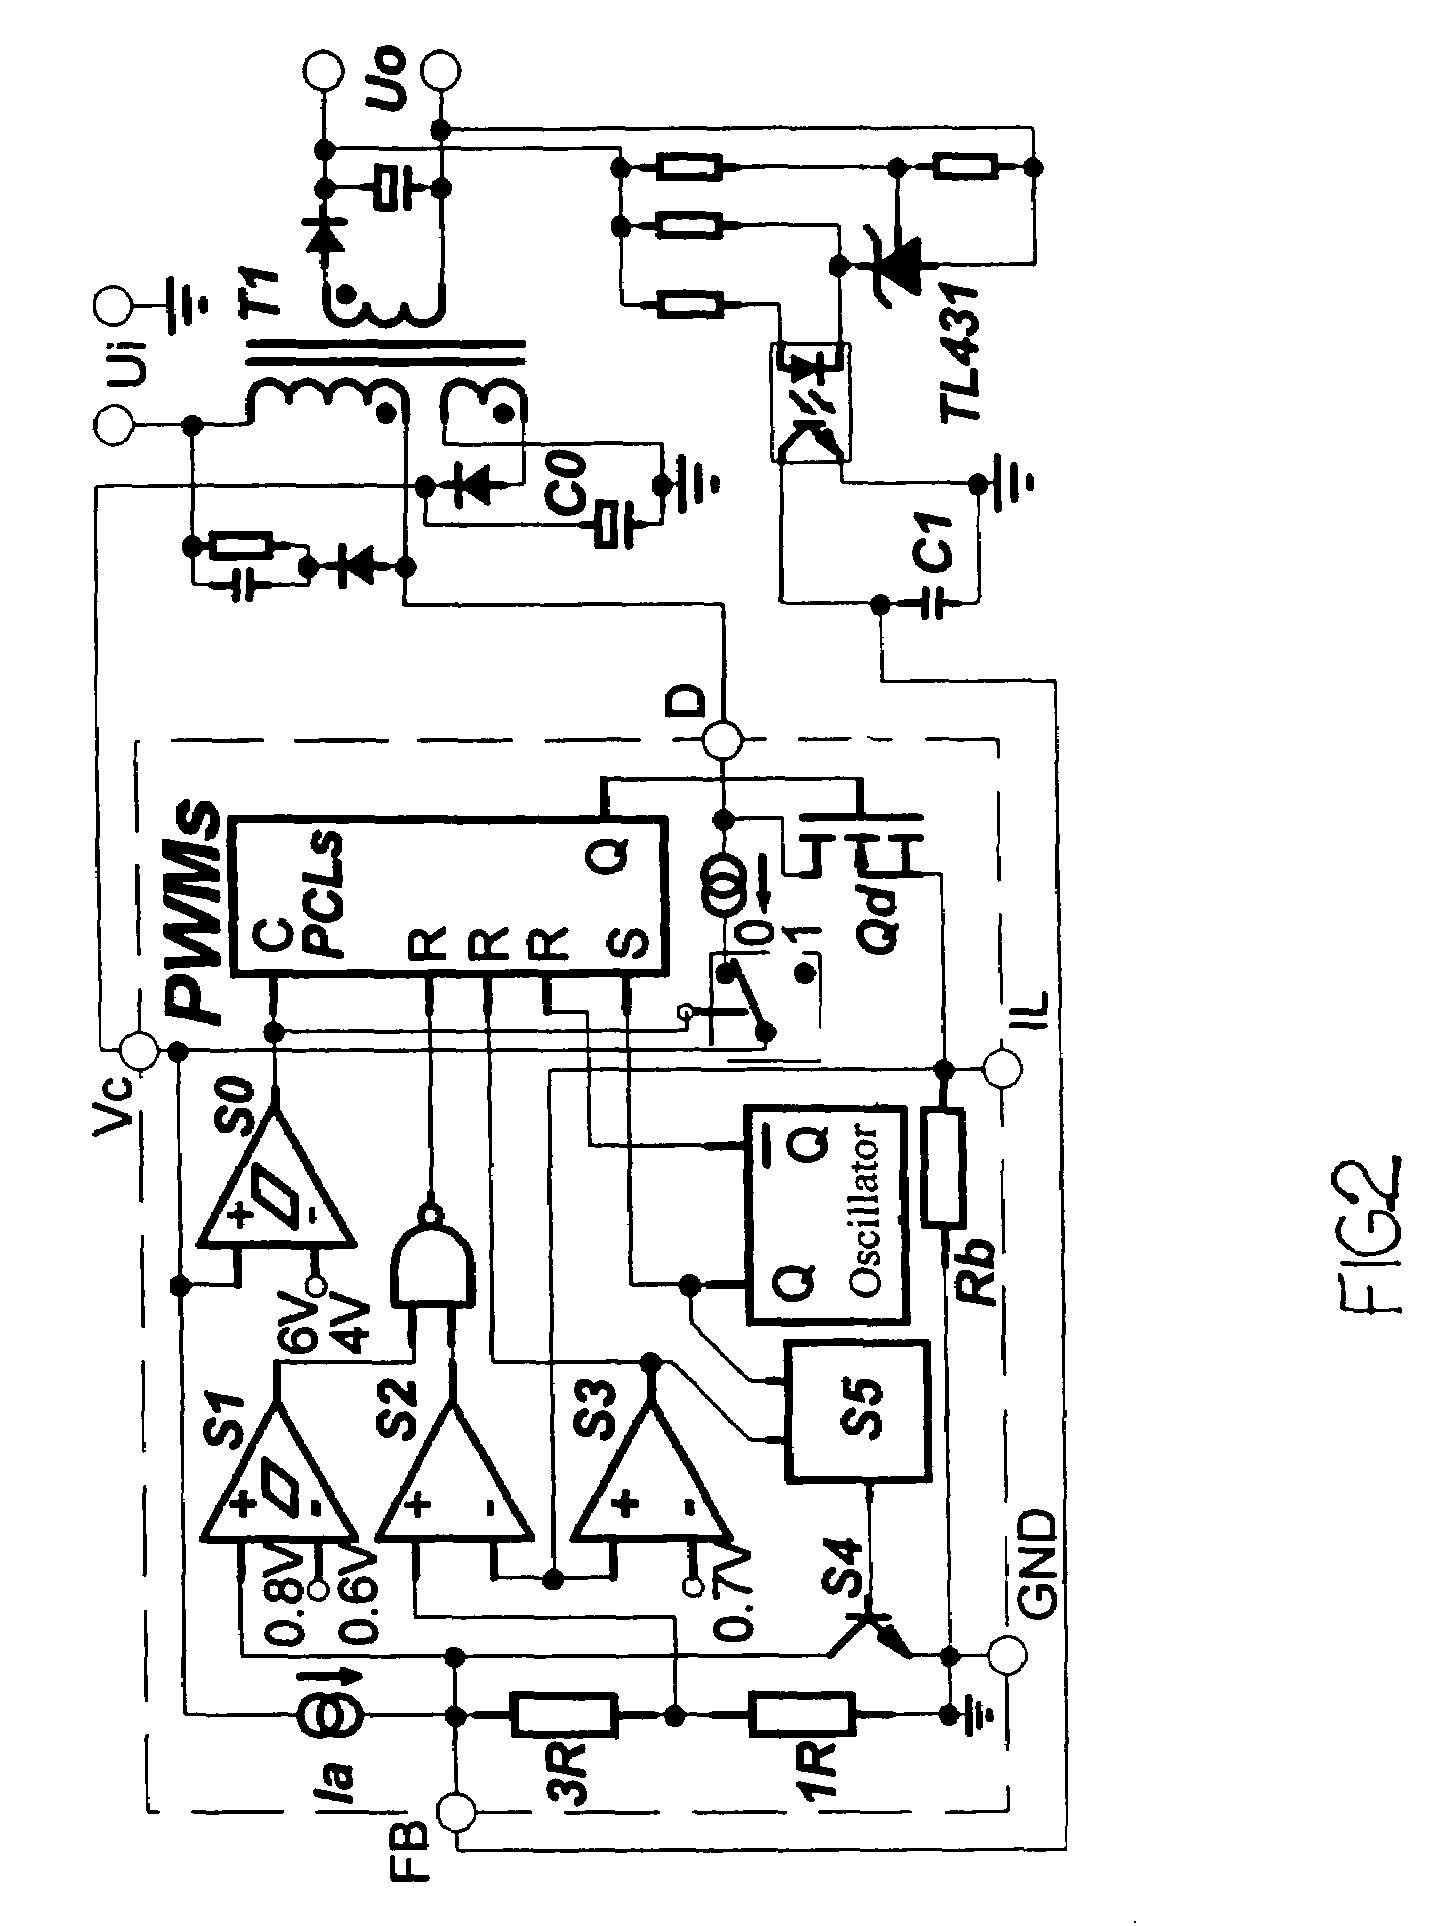 Green switch power supply with standby function and its IC